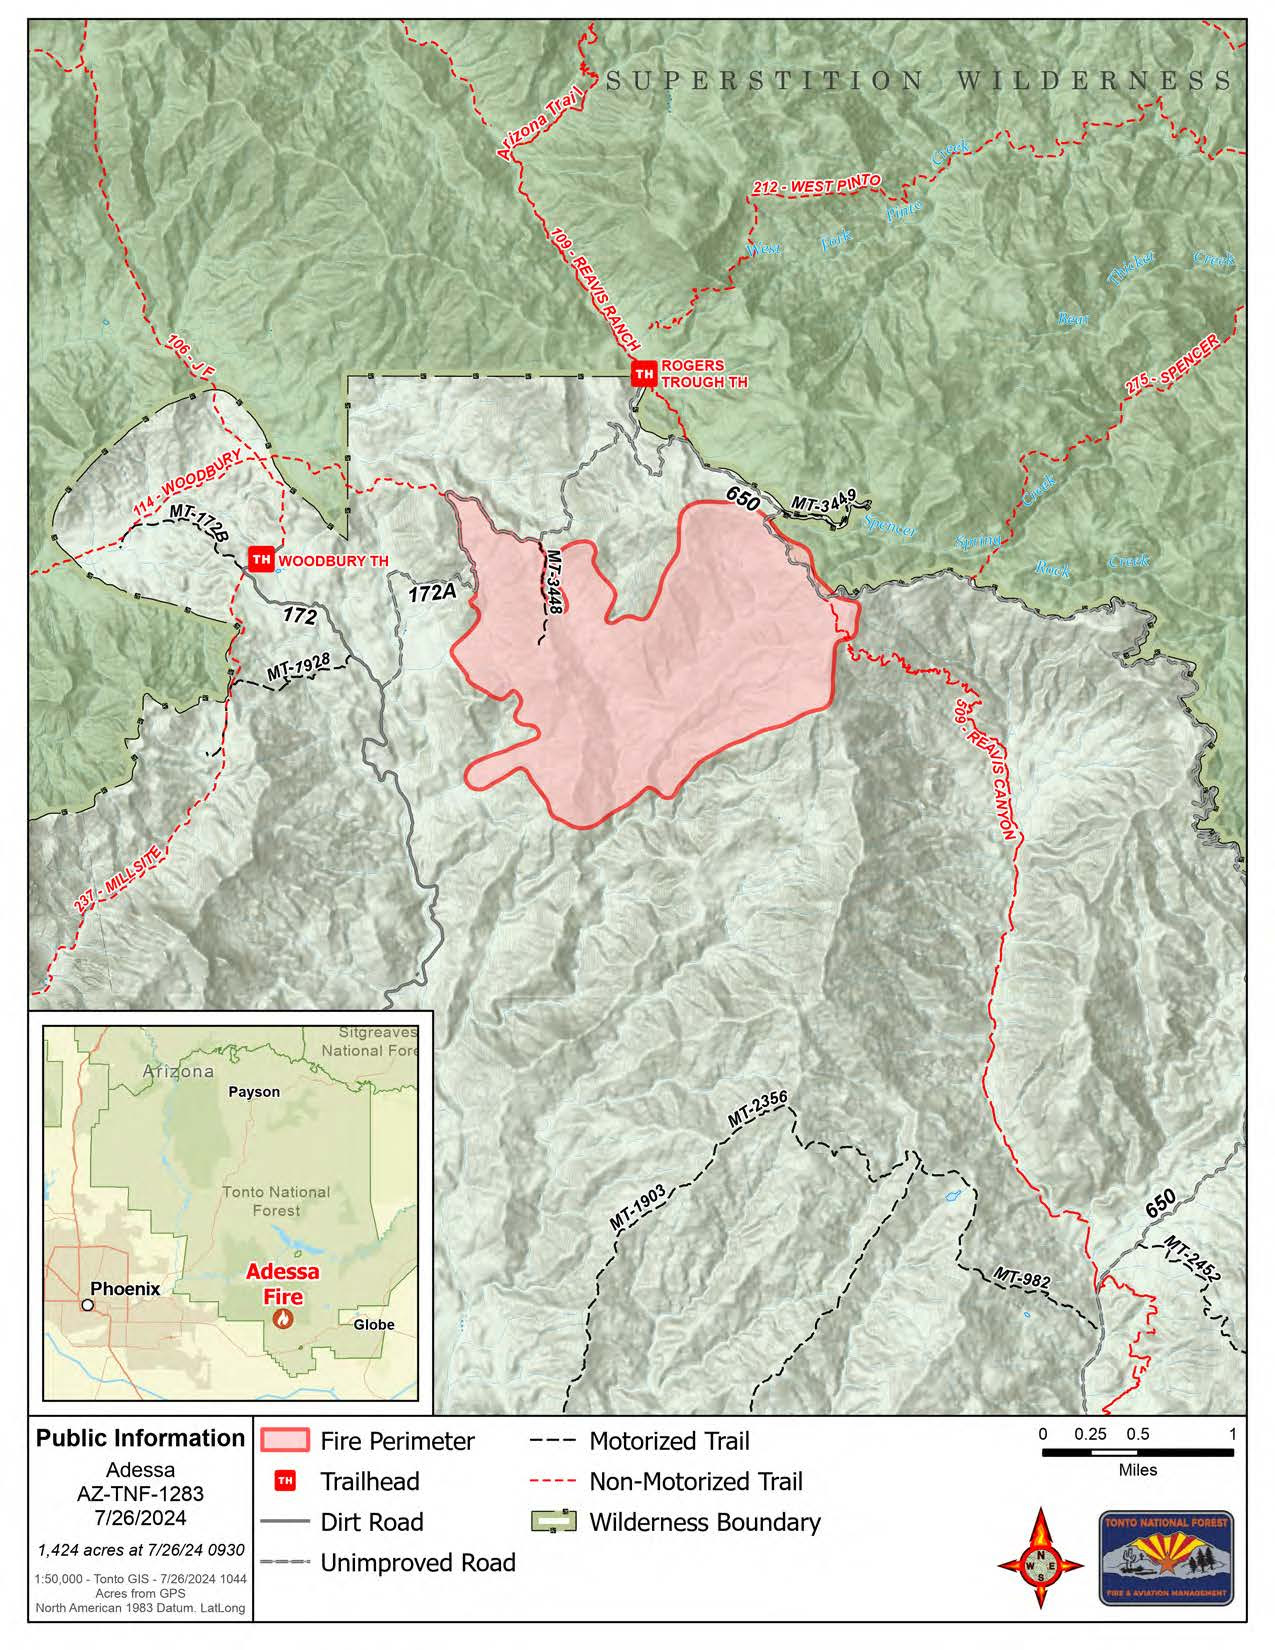 A map of the Adessa Fire on July 26 2024